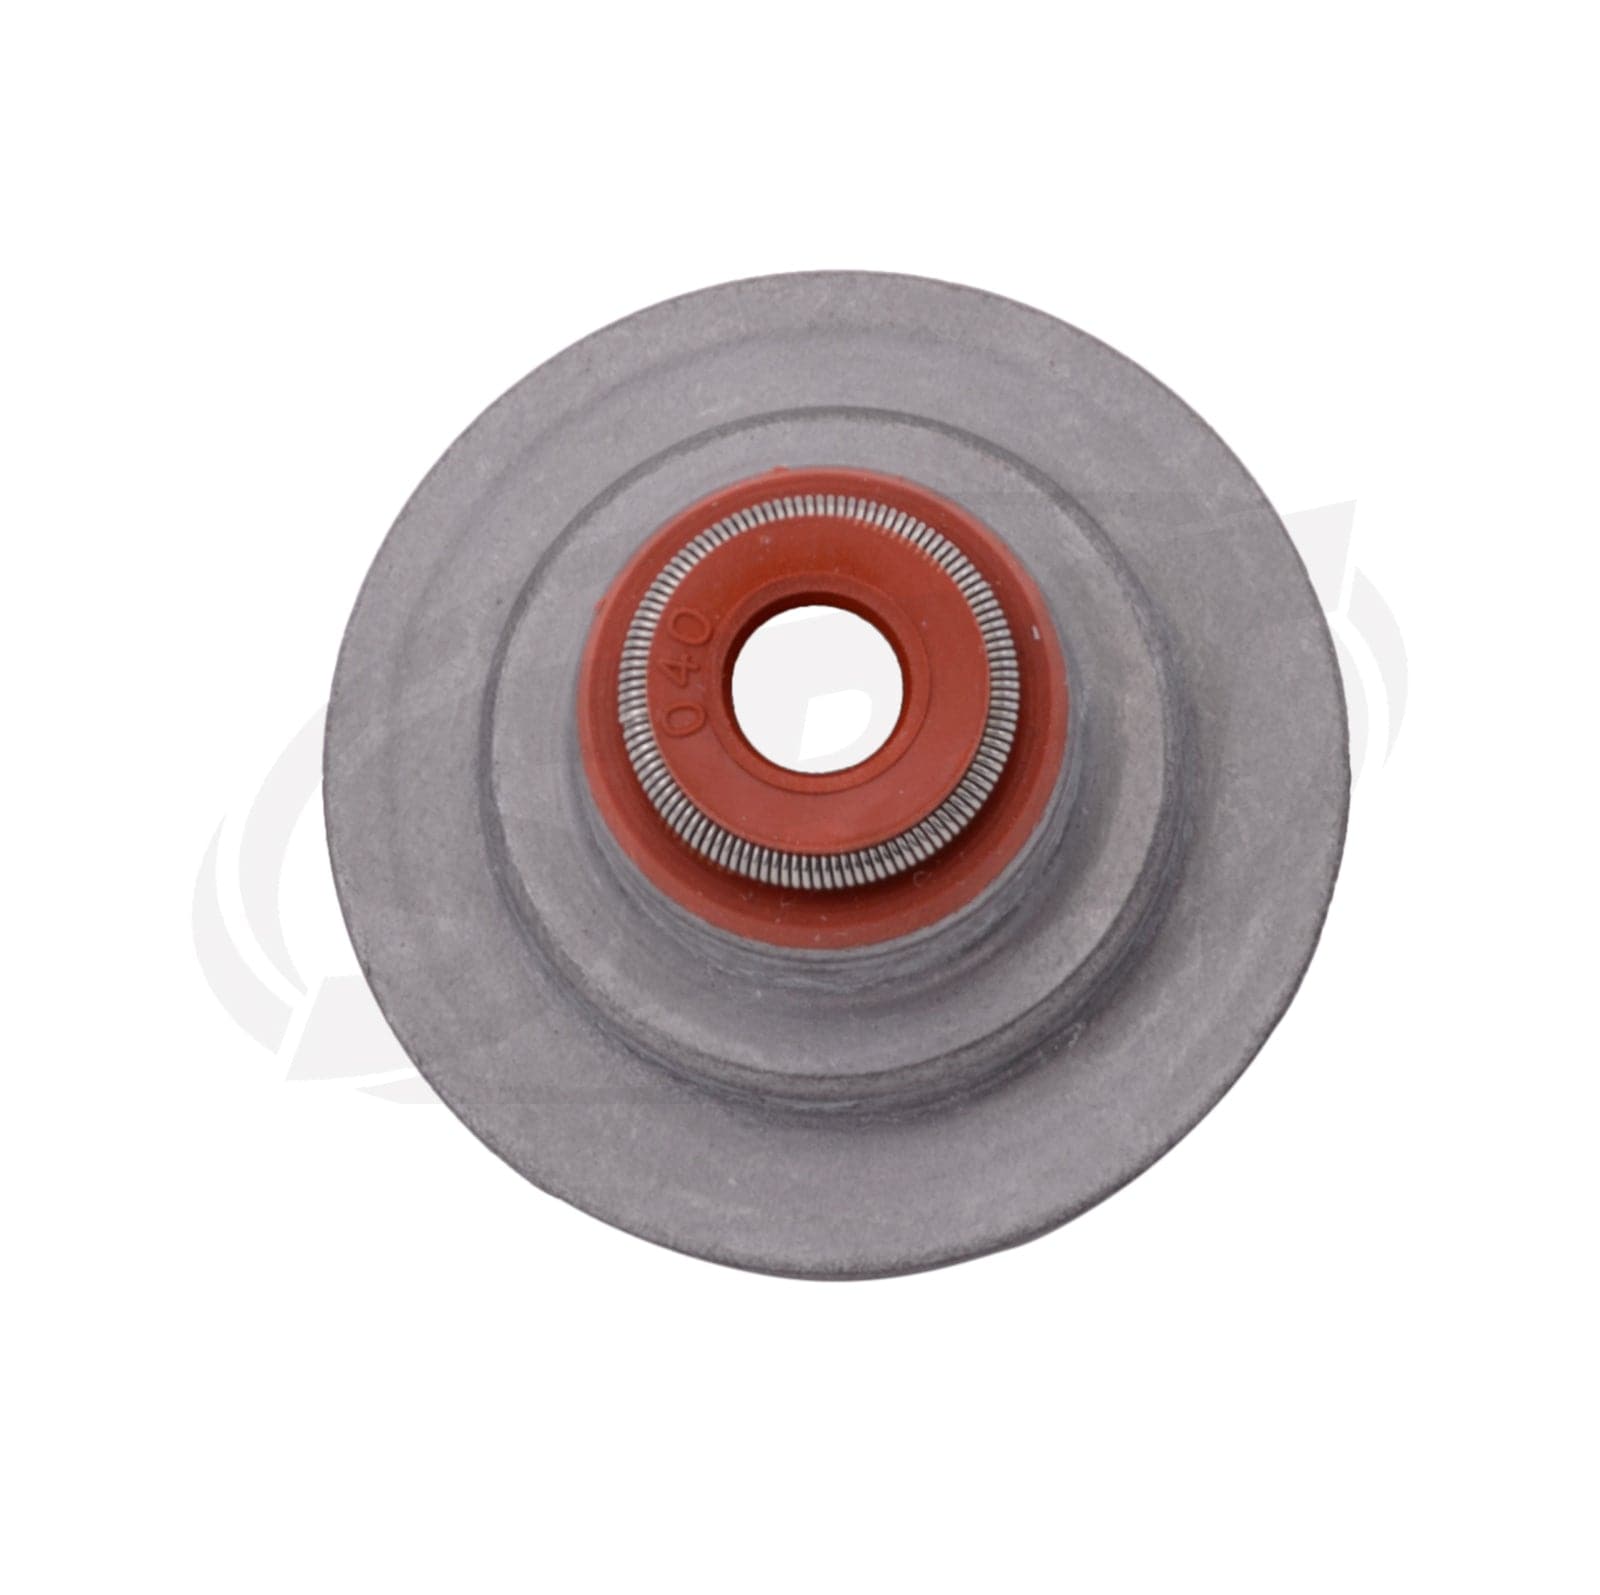 Replacement Valve Stem Seal for Sea-Doo Spark 420431671